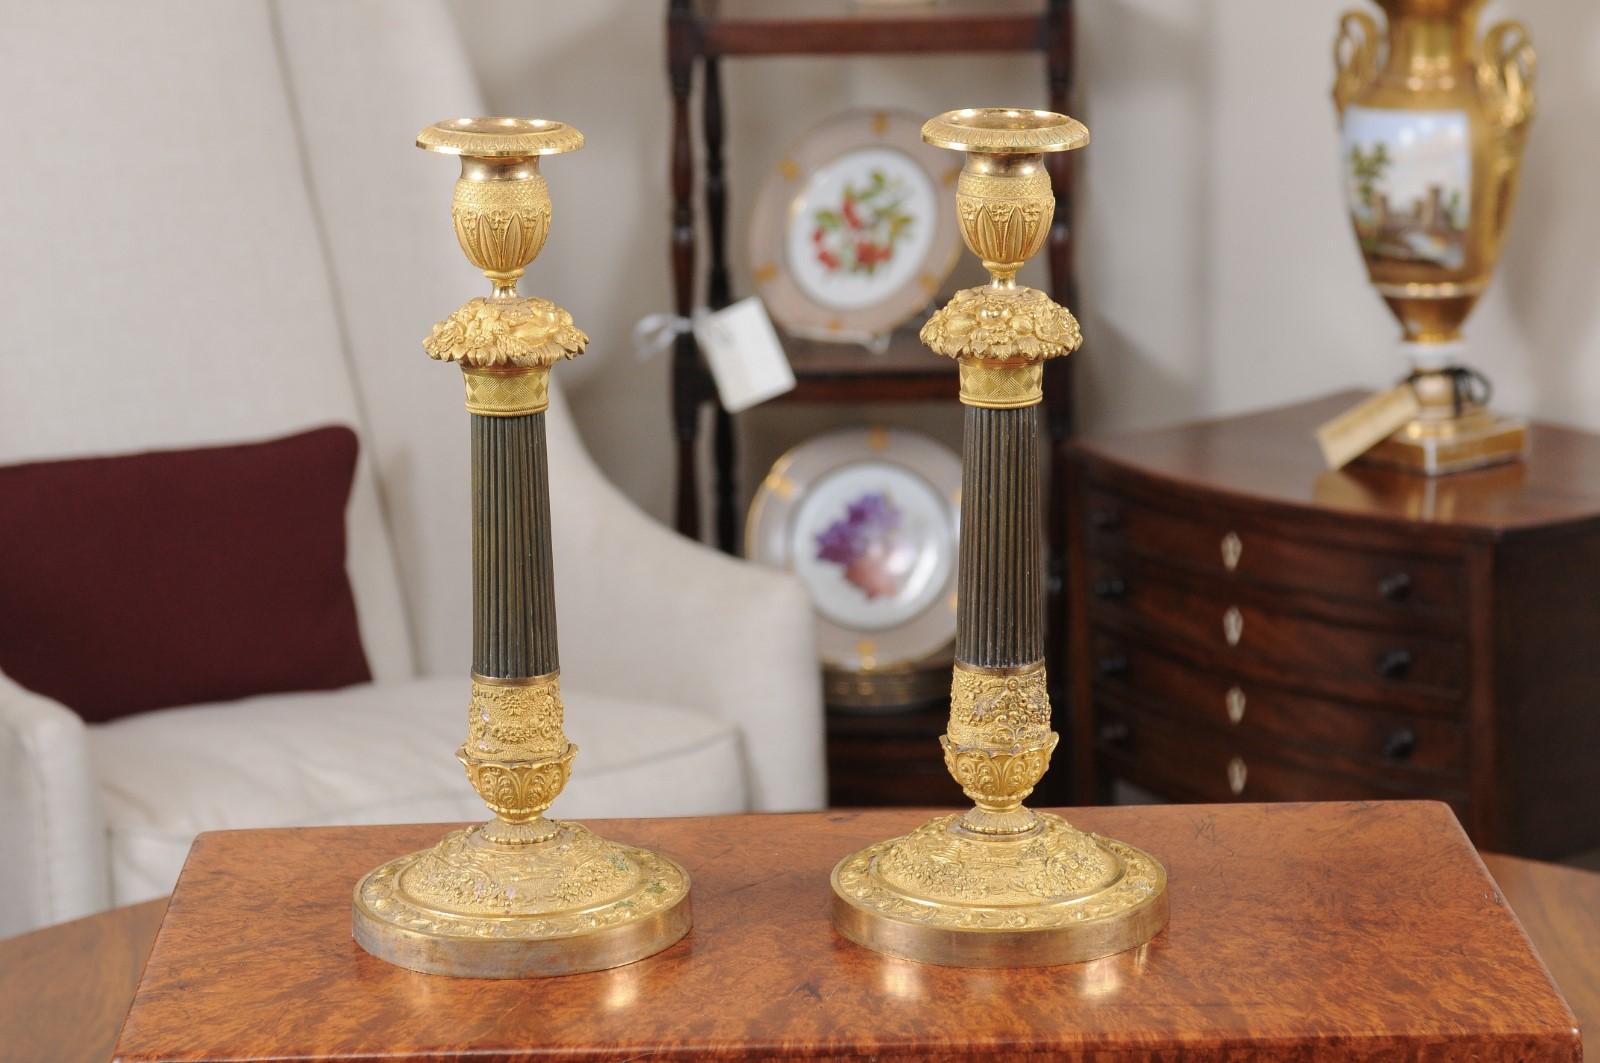 Pair of Bronze Dore Candlesticks with Foliage Design, Early 19th Century France For Sale 7